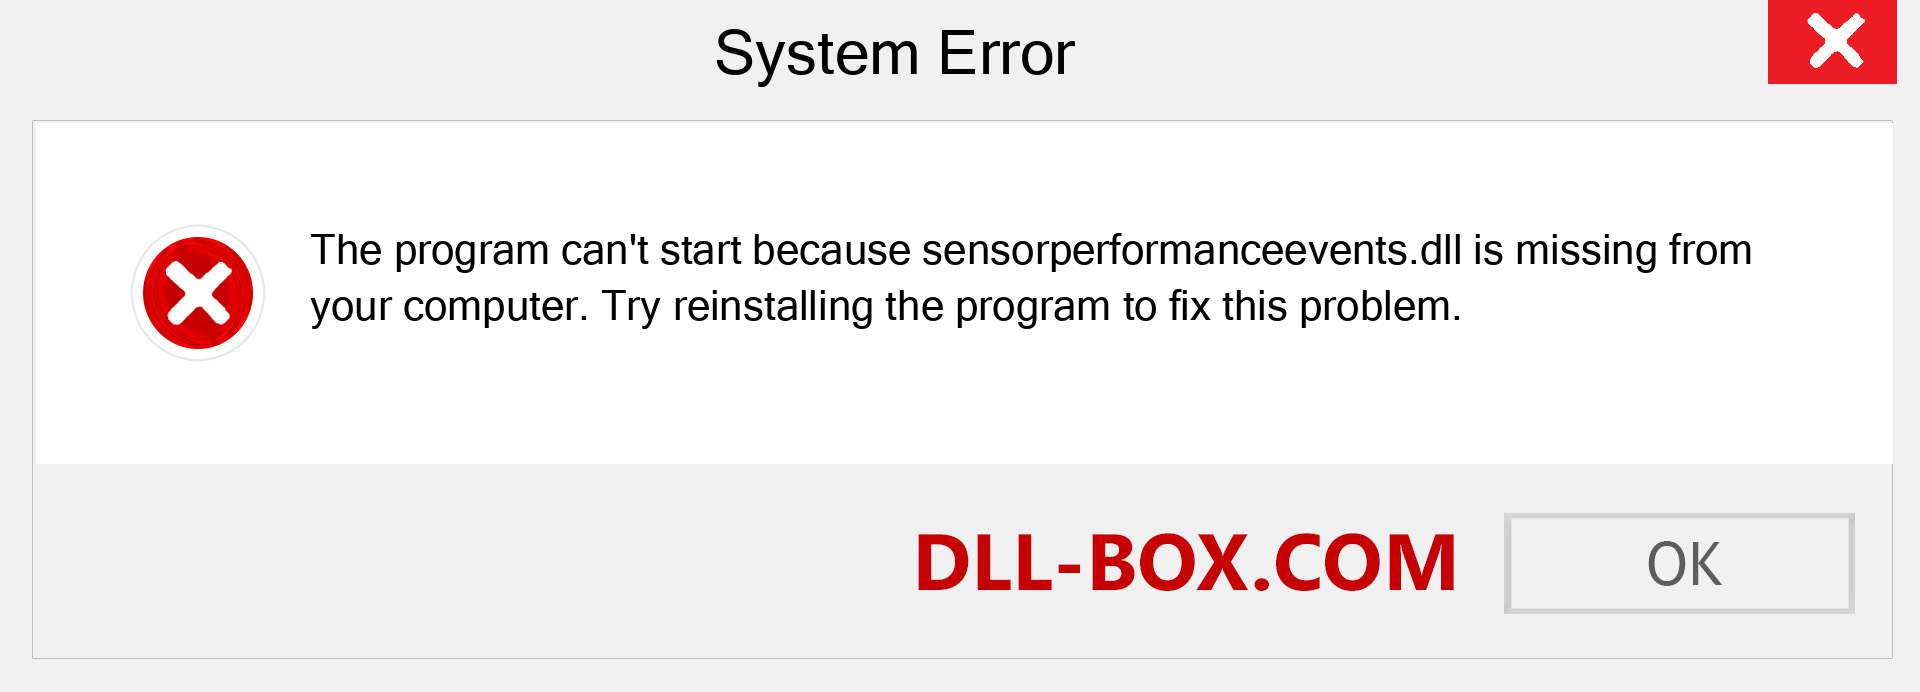  sensorperformanceevents.dll file is missing?. Download for Windows 7, 8, 10 - Fix  sensorperformanceevents dll Missing Error on Windows, photos, images